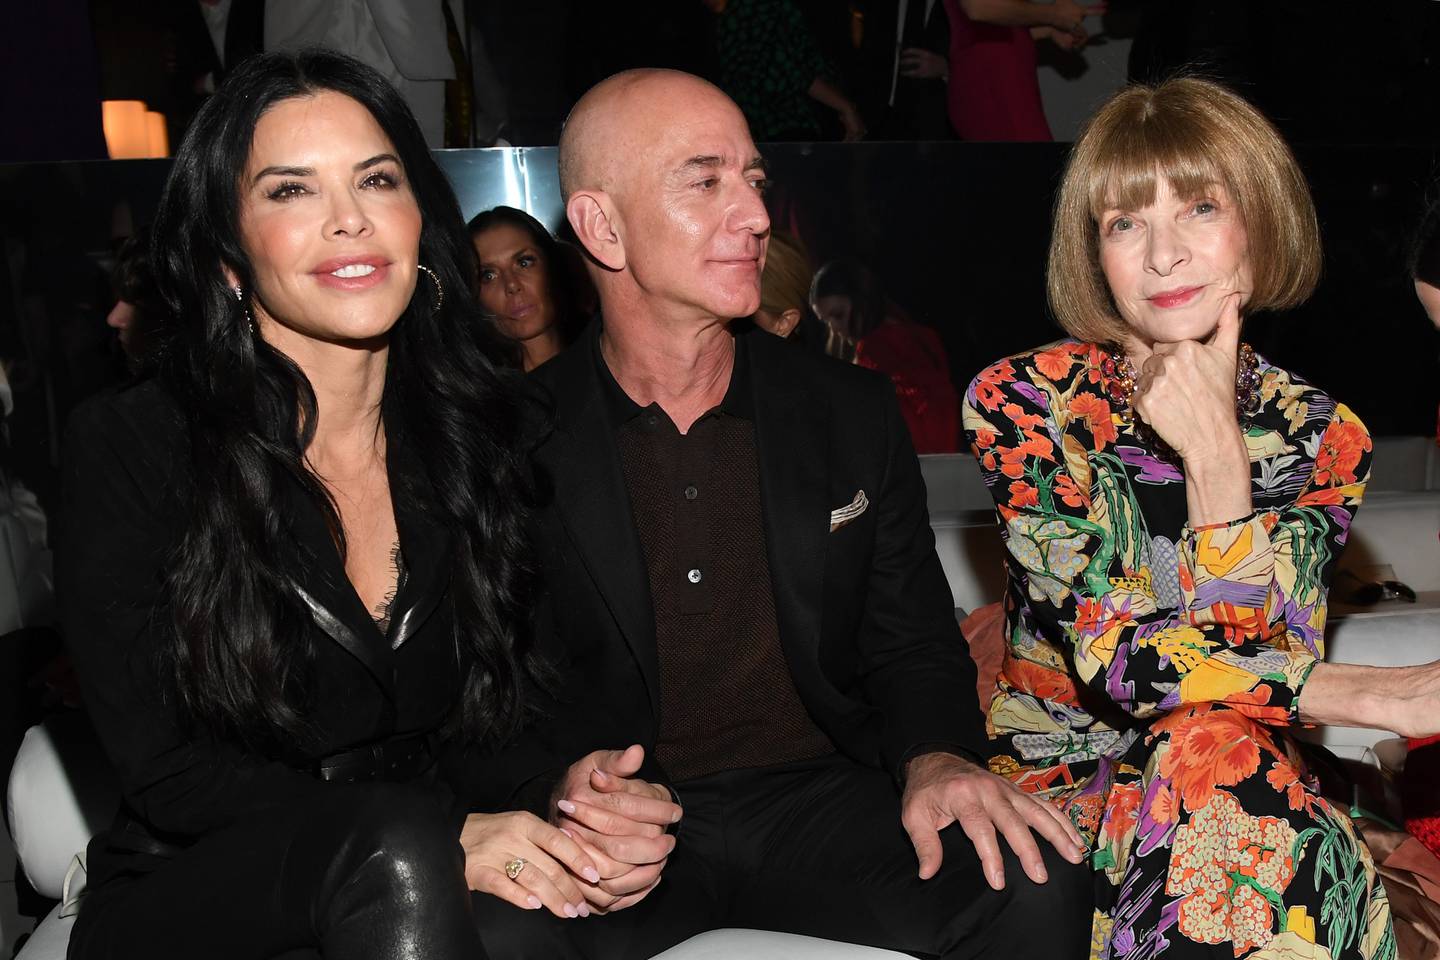 Amazon CEO Jeff Bezos and Vogue editor Anna Wintour attend the Tom Ford’s Autumn/Winter 2020 show on February 7, 2020 in Hollywood, California.